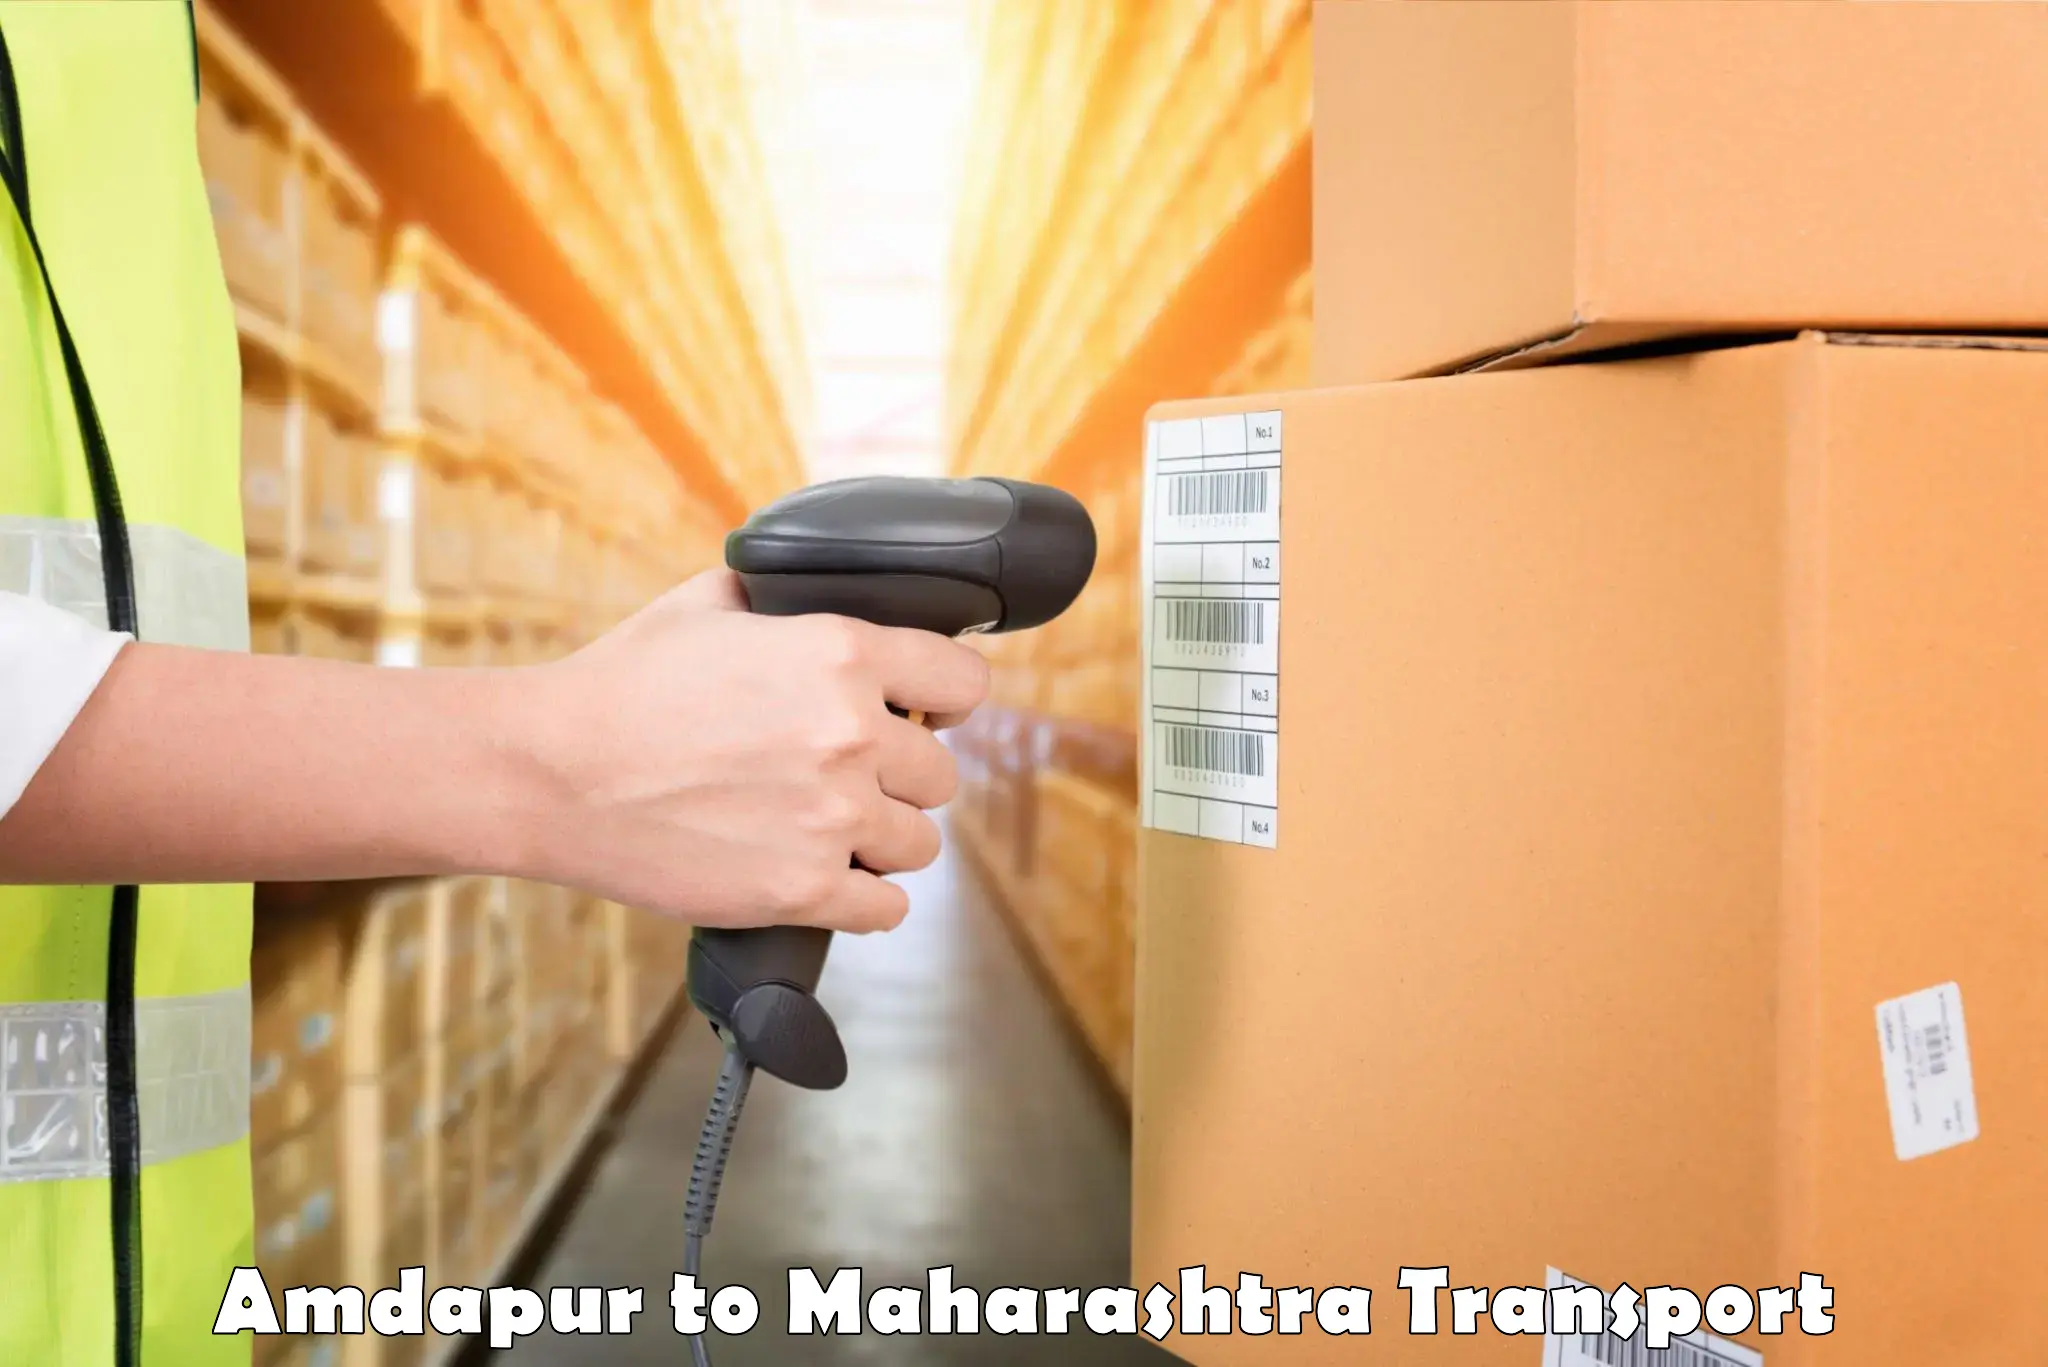 Express transport services in Amdapur to Shegaon